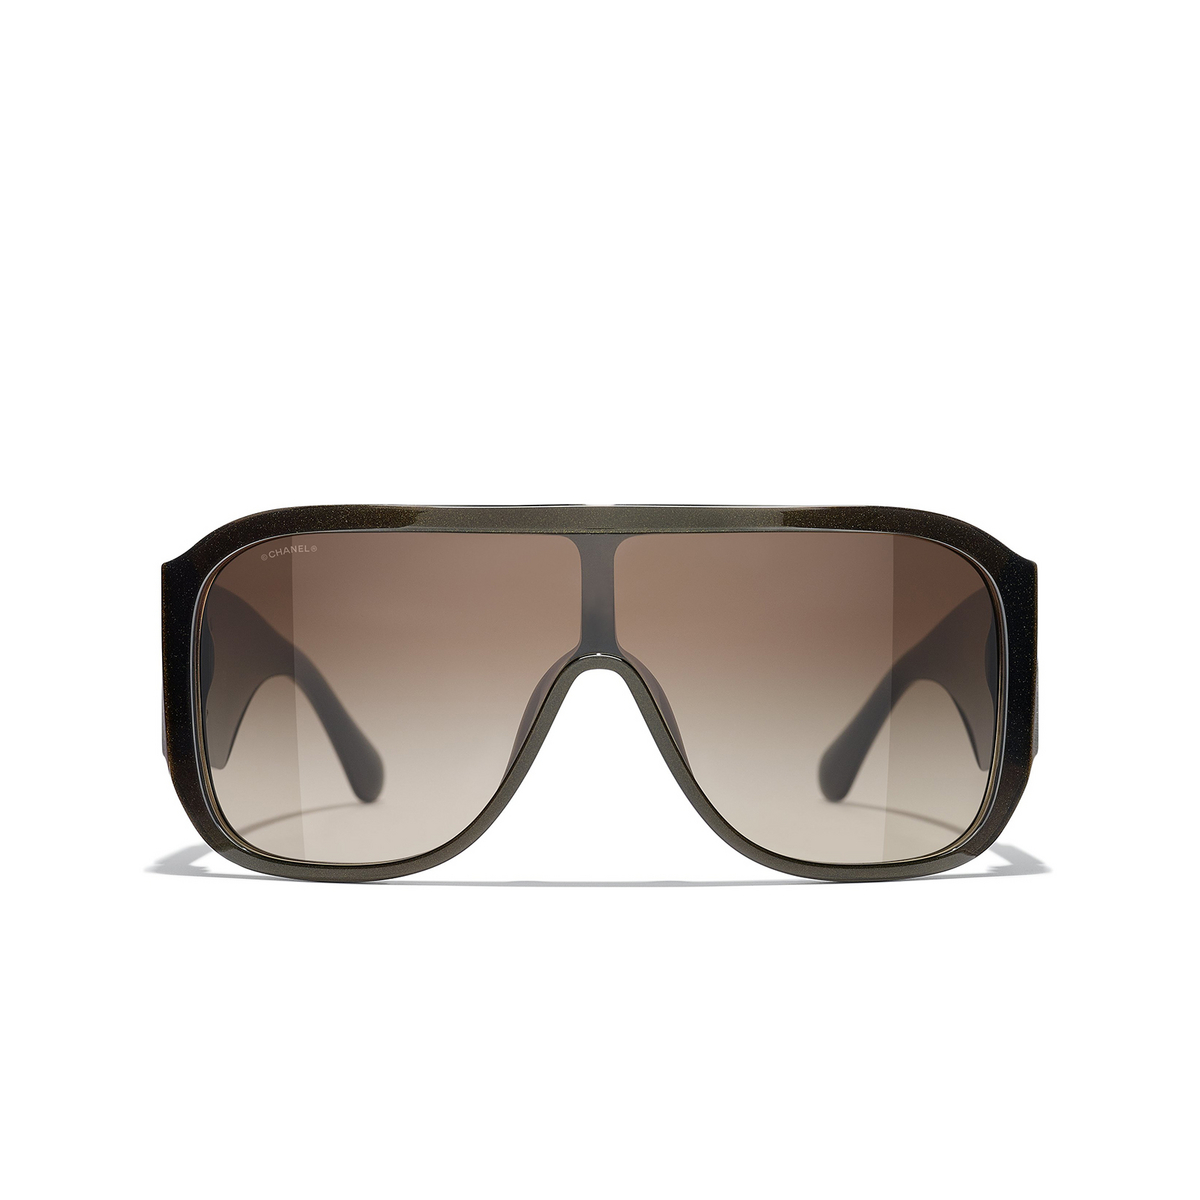 CHANEL shield Sunglasses 1706S5 Brown - front view